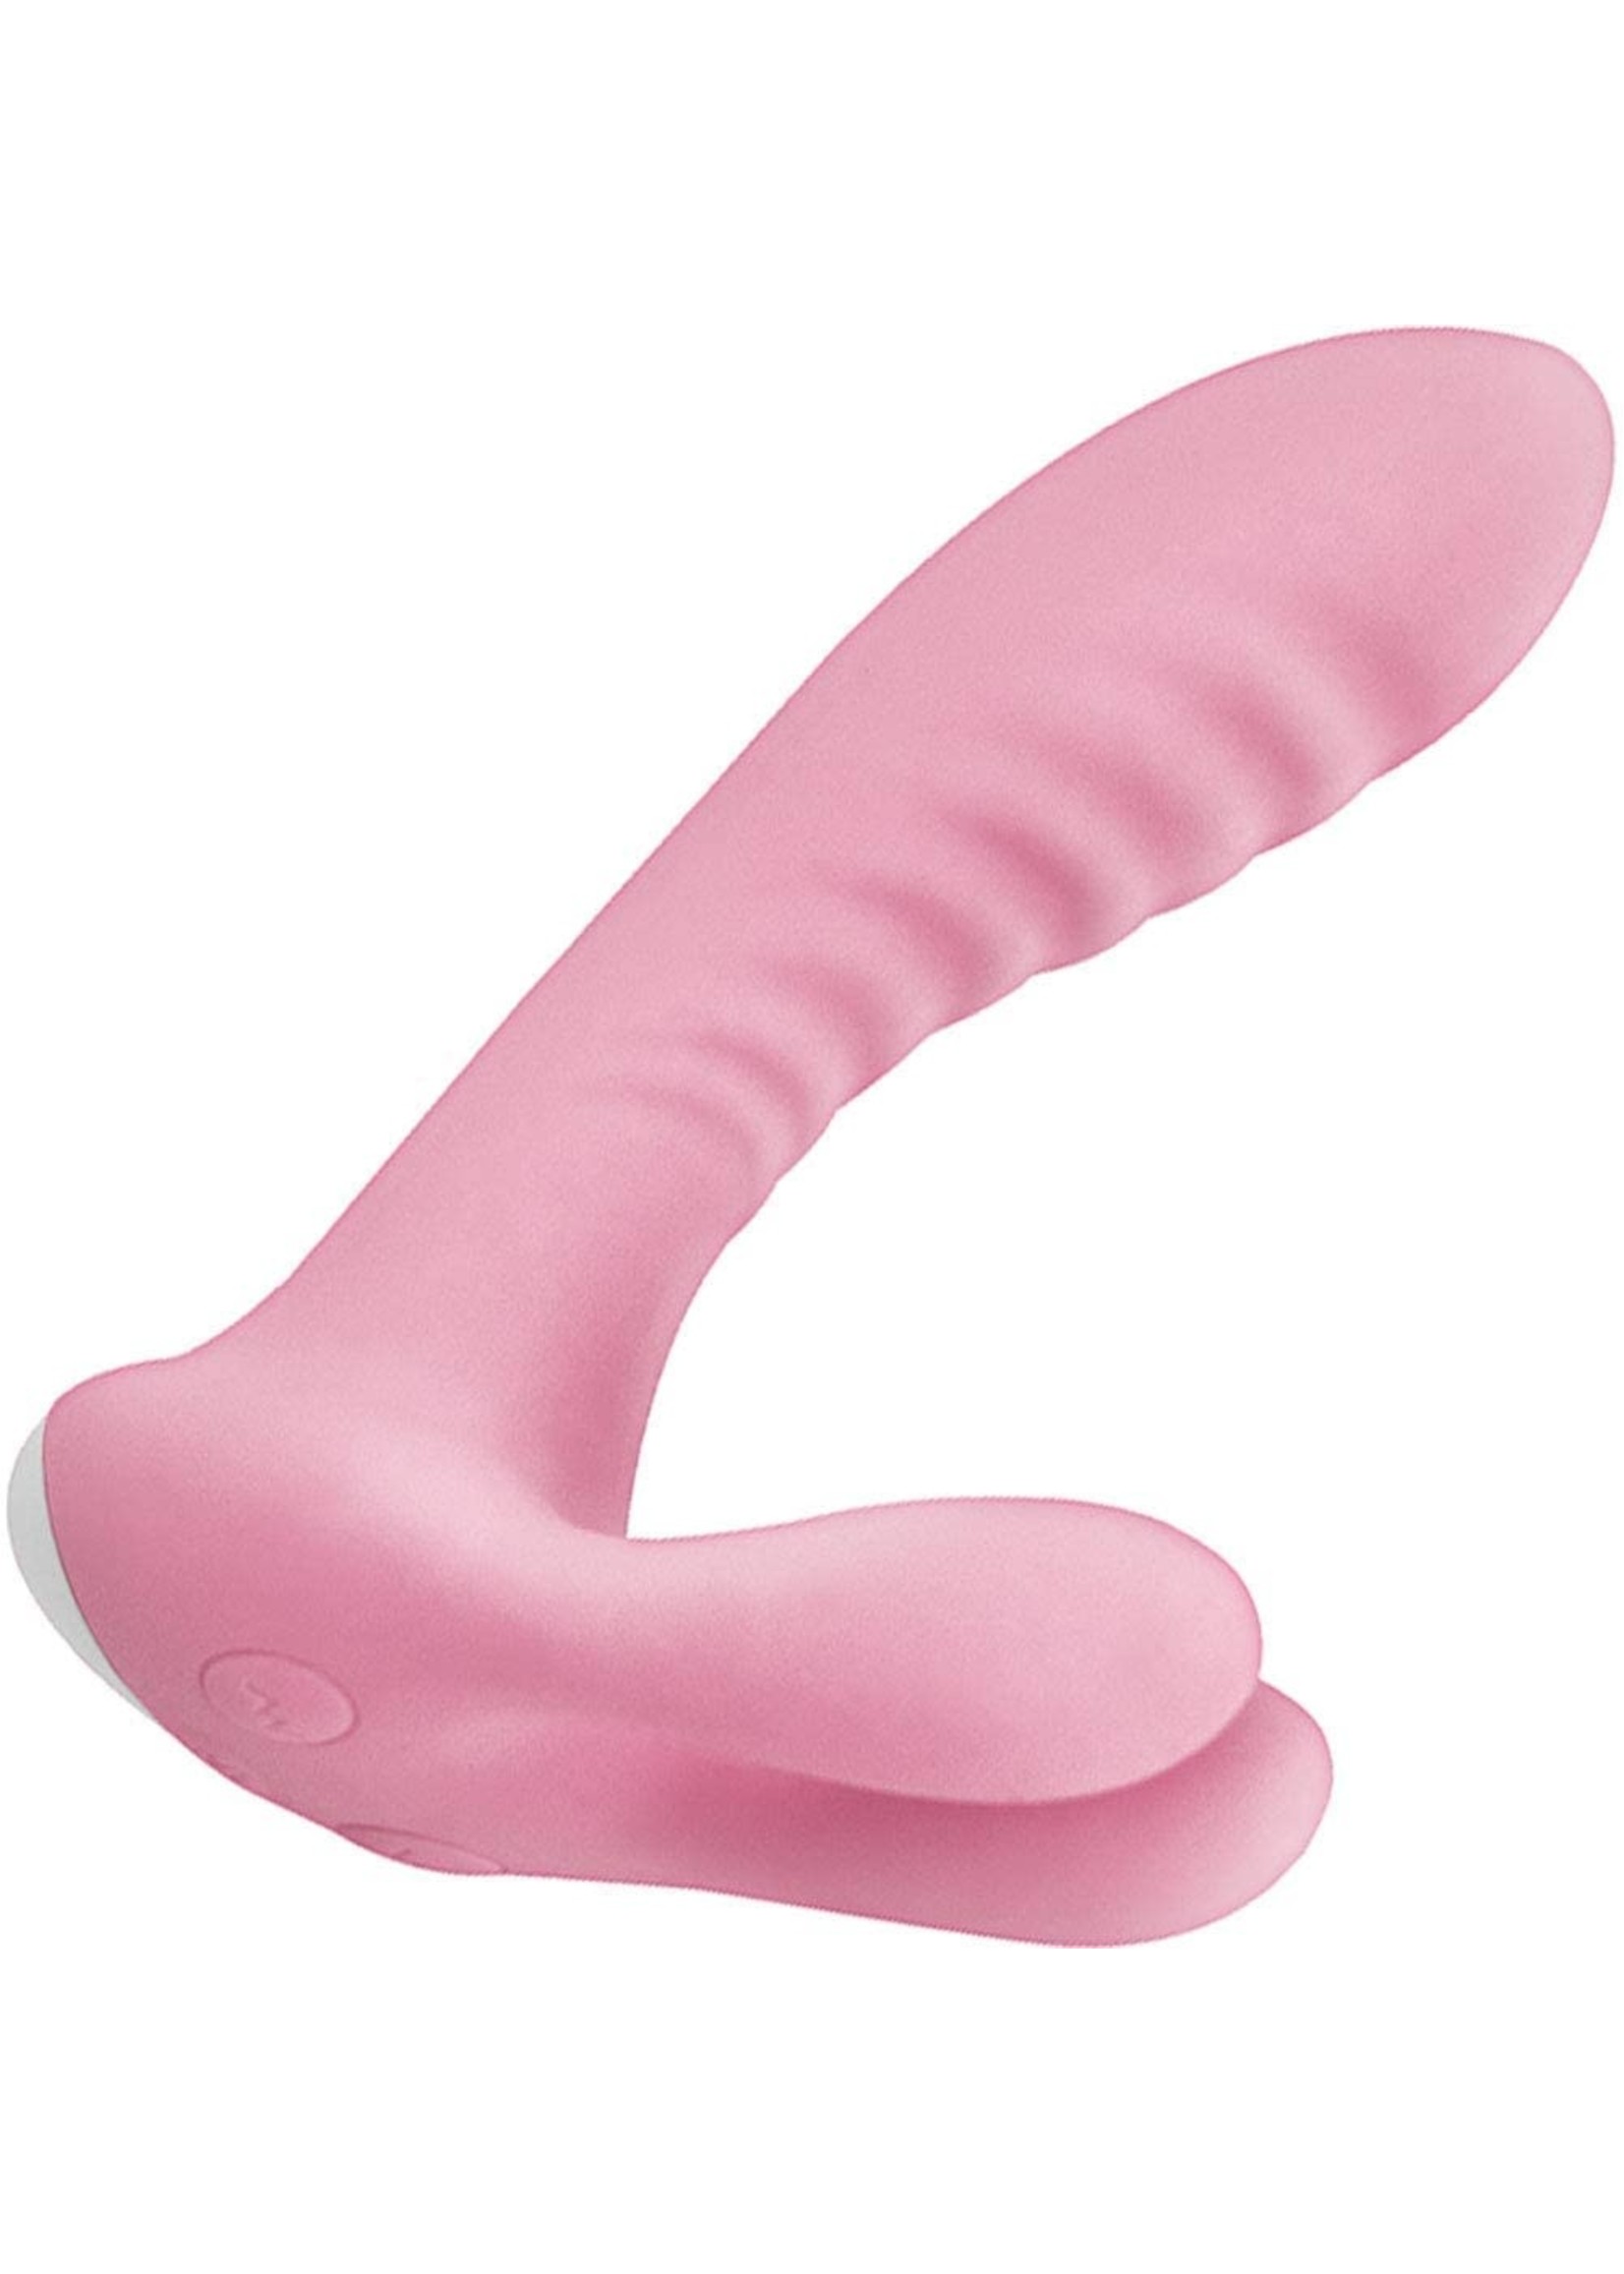 Vibes Of New York Heat Up Bunny Rechargeable Silicone Warming Rabbit Vibrator in Pink